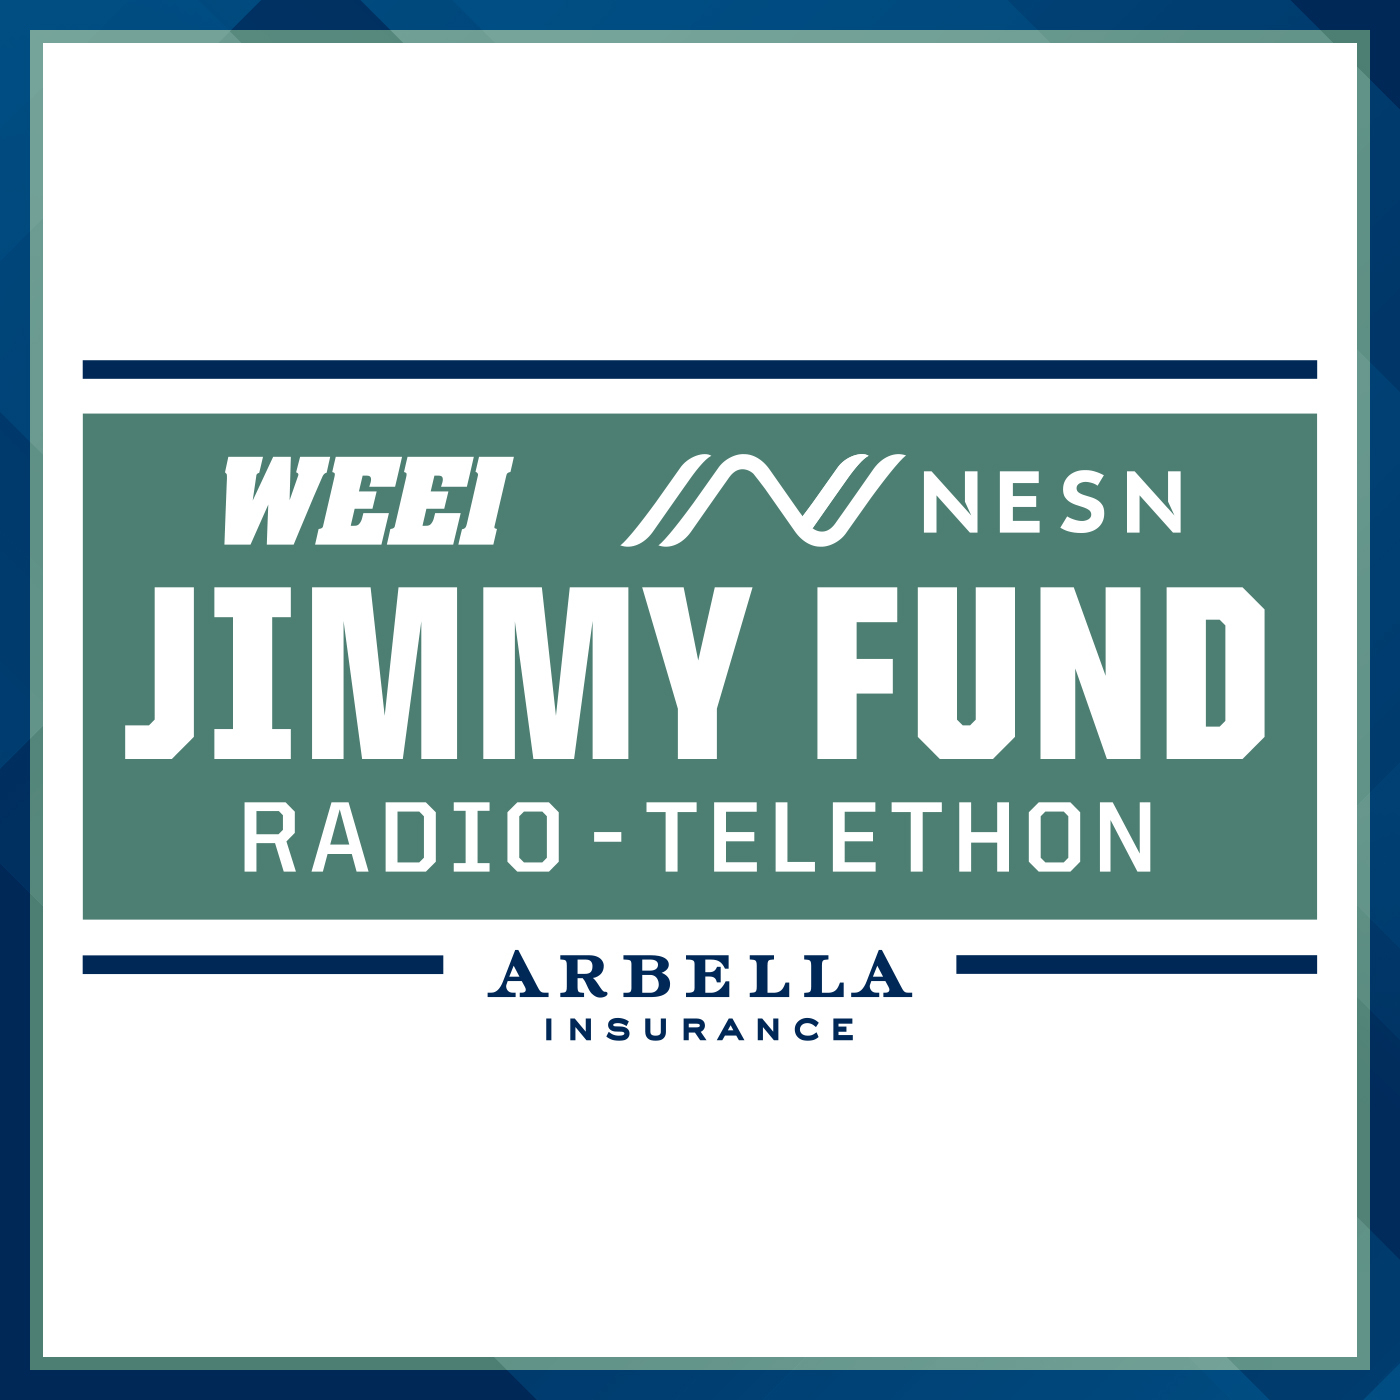 Lisa Scherber Joins Mut at Night to discuss her incredible experience with the WEEI/NESN Jimmy Fund Radio Telethon 